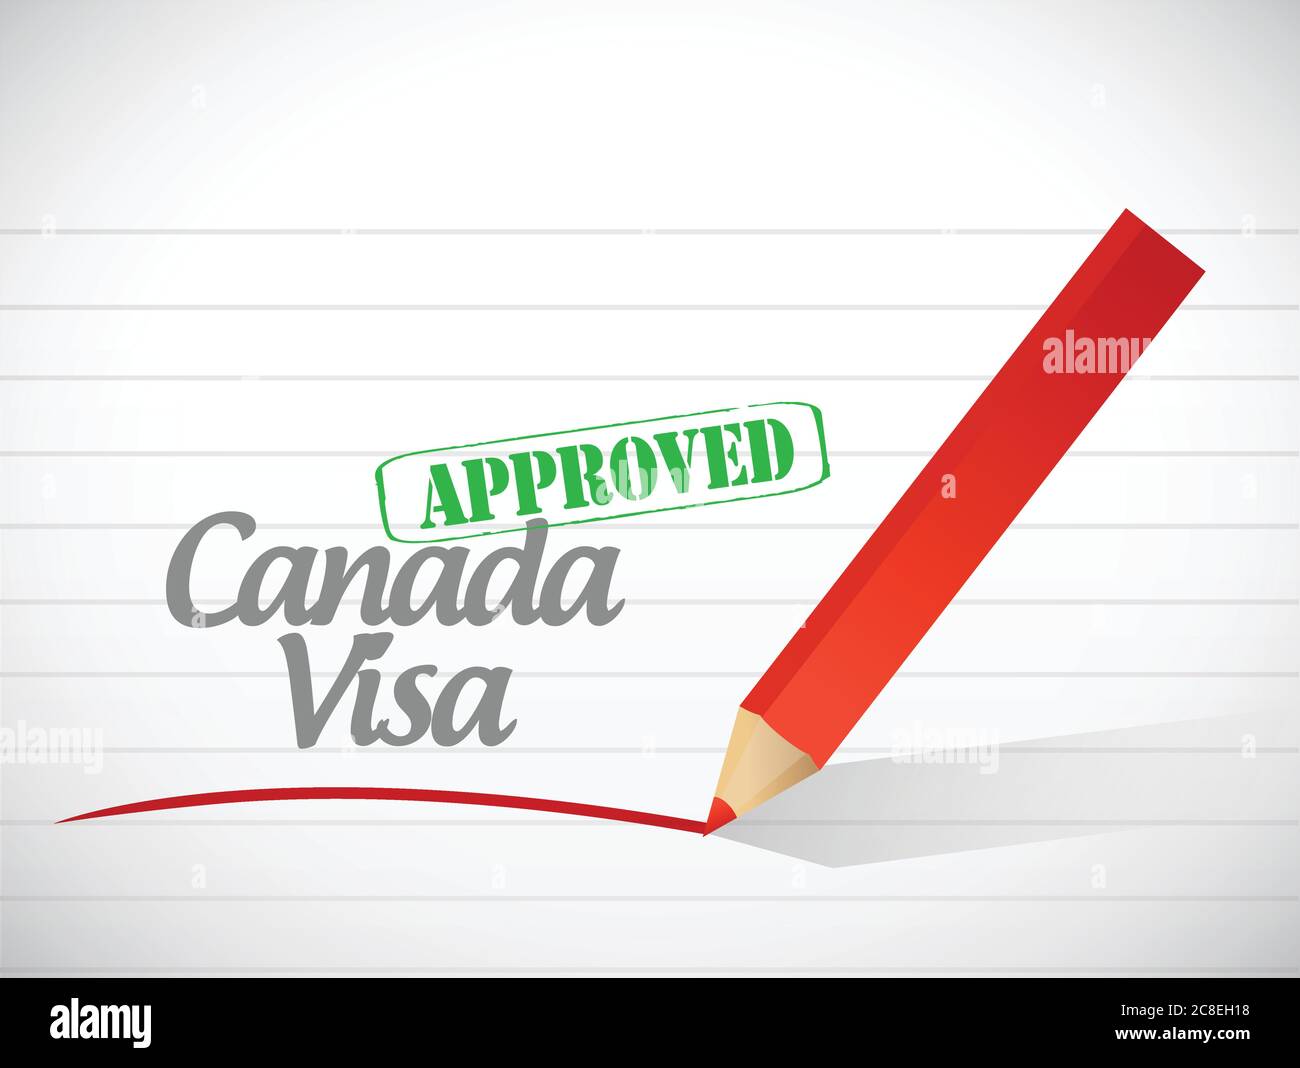 Canada visa approved sign illustration design over a white background Stock Vector